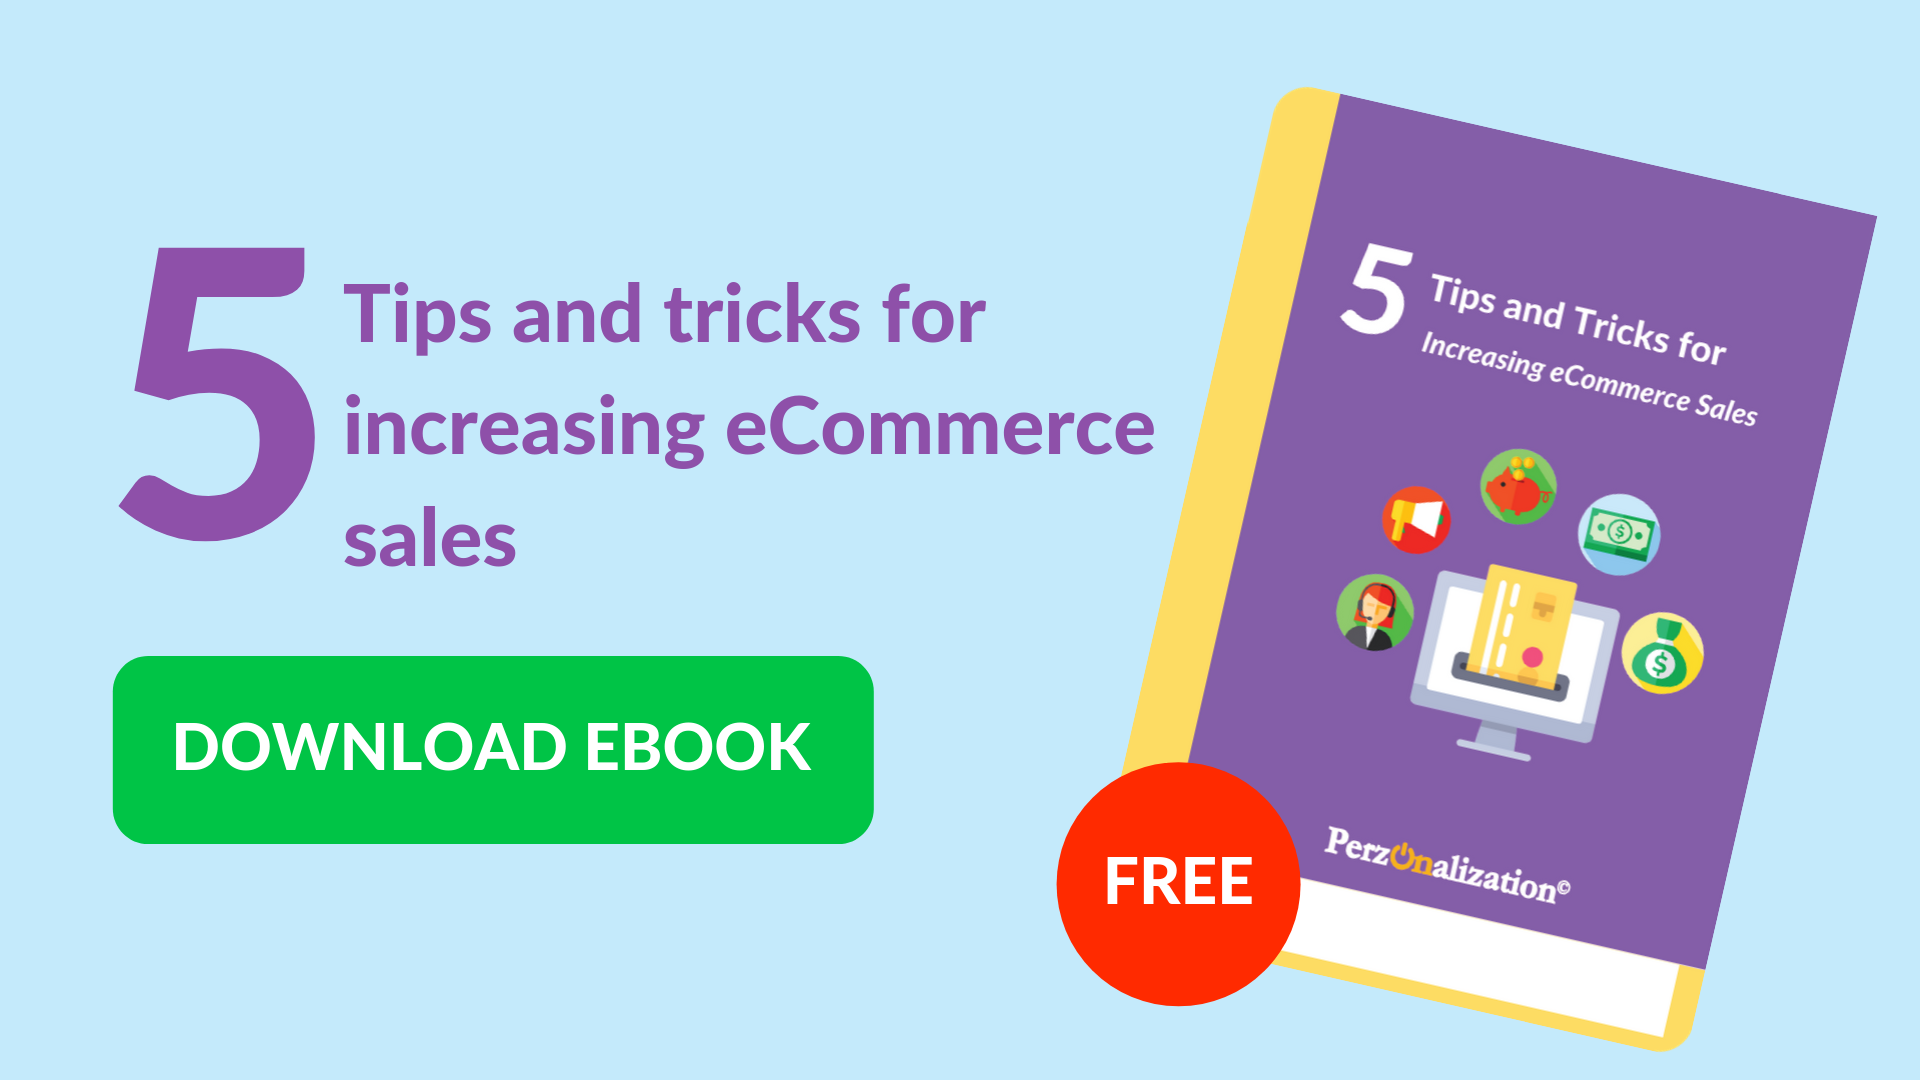 Download free eBook: Tips for increasing eCommerce sales